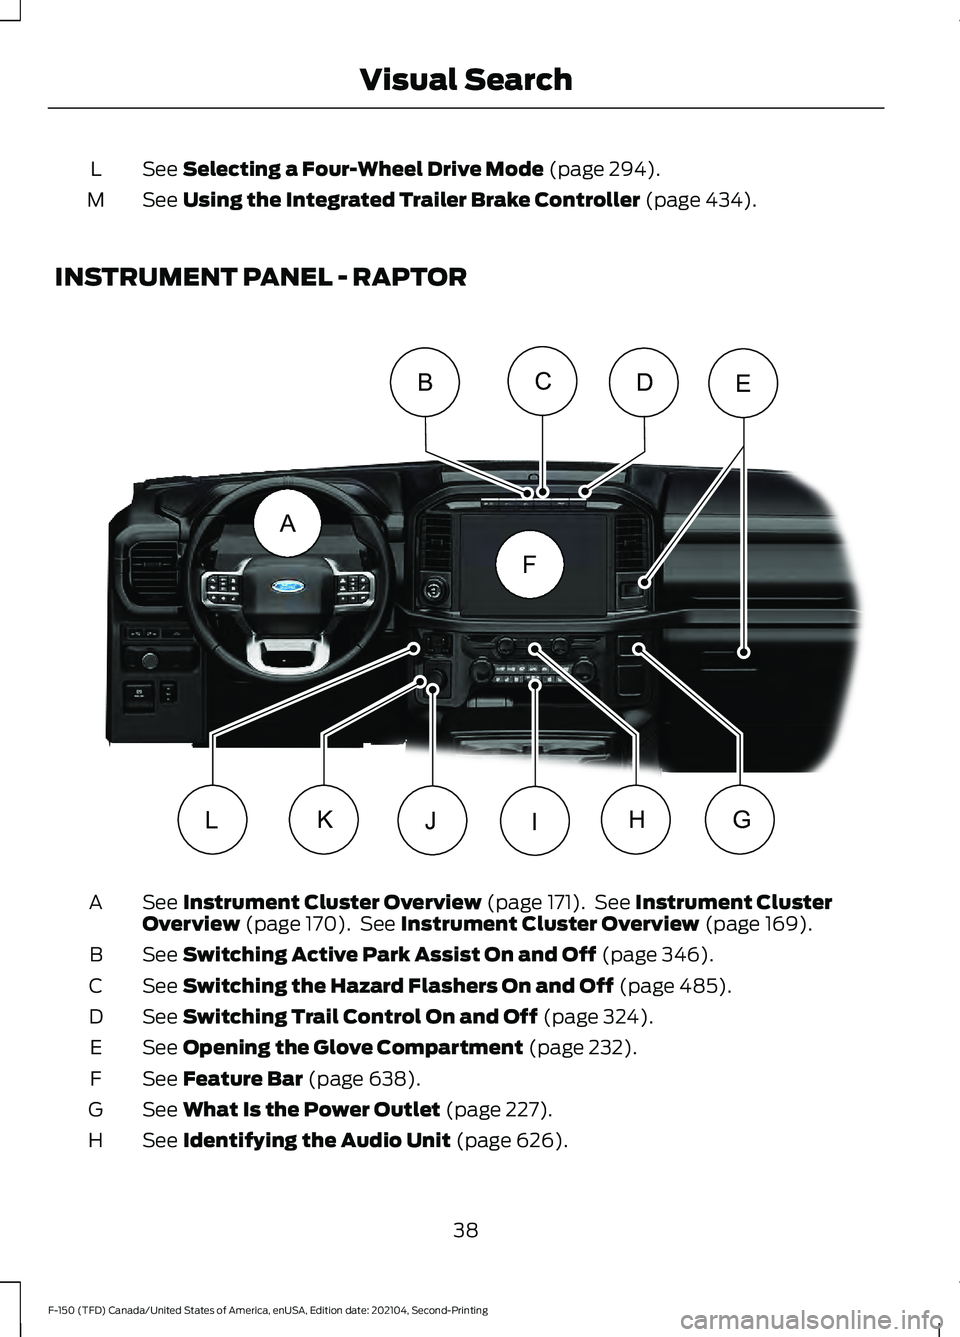 FORD F-150 2021  Owners Manual See Selecting a Four-Wheel Drive Mode (page 294).
L
See 
Using the Integrated Trailer Brake Controller (page 434).
M
INSTRUMENT PANEL - RAPTOR See 
Instrument Cluster Overview (page 171).  See Instrum